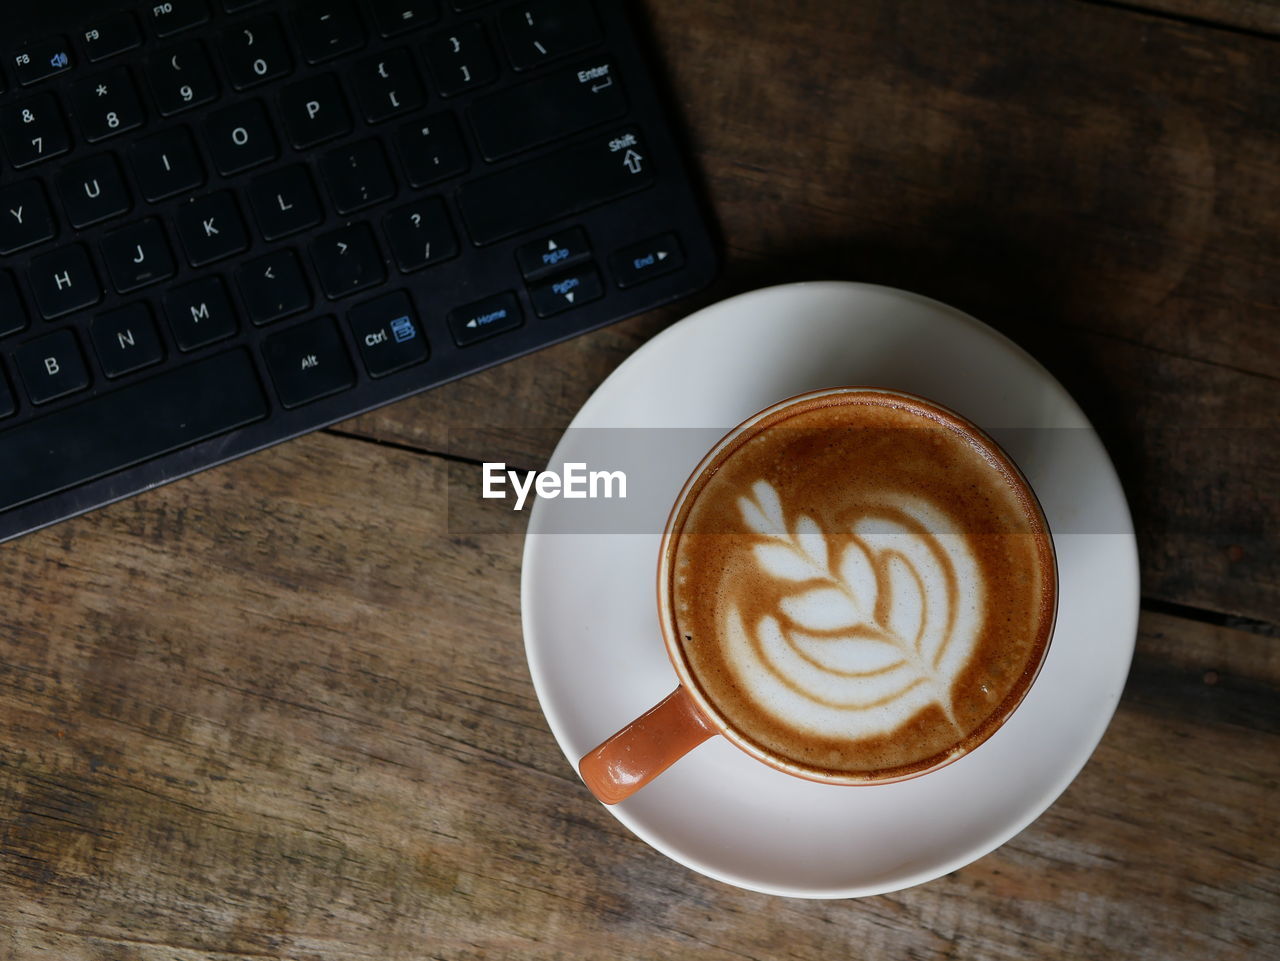 One cup of coffe latte with wooden and keyboard background 